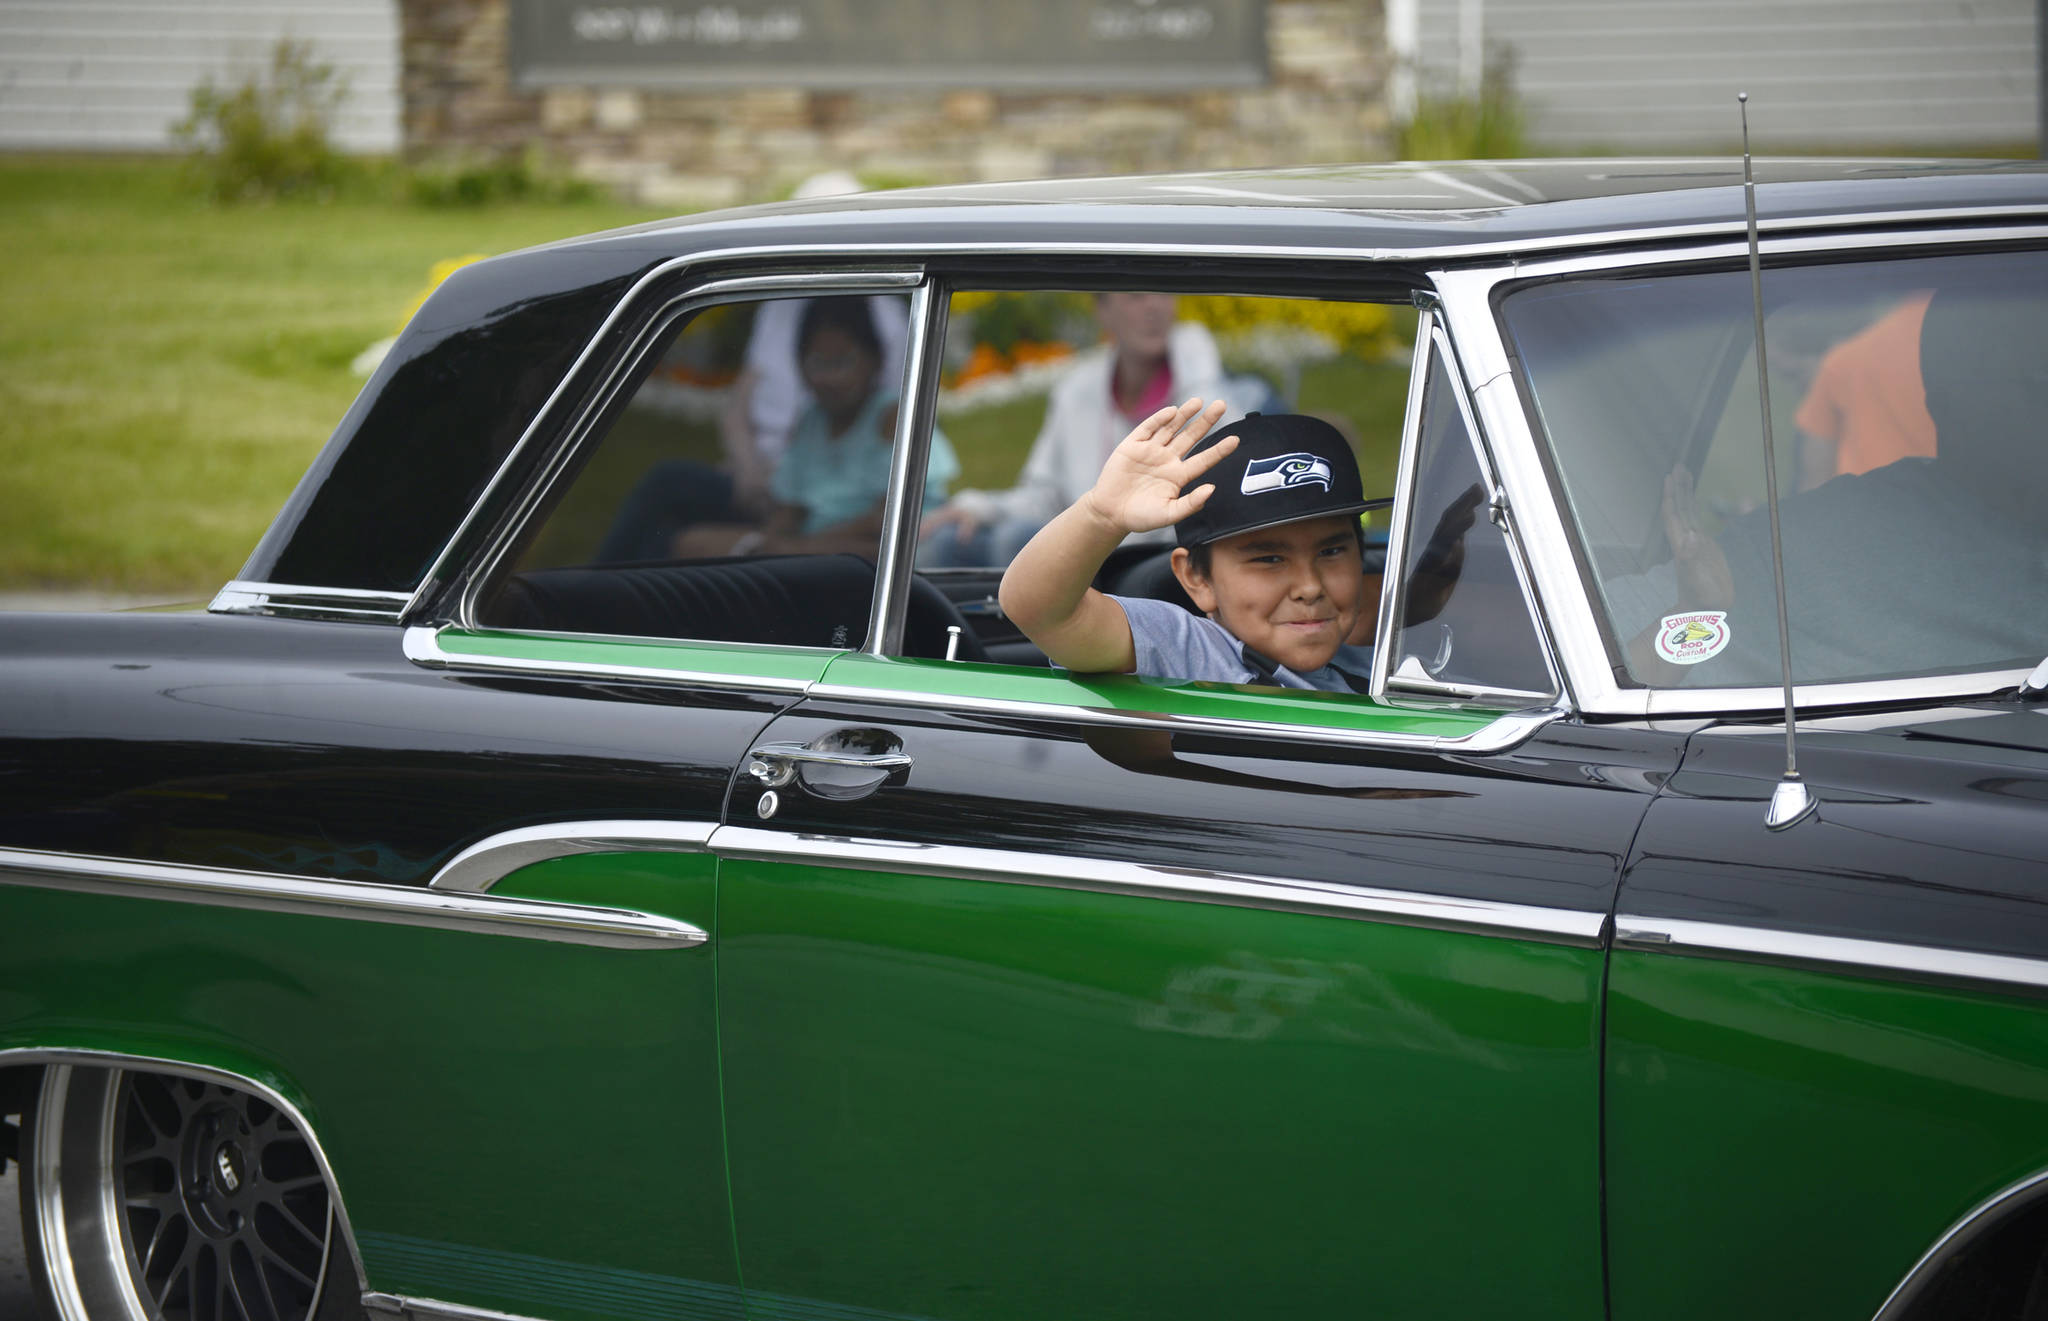 A participant in classic car club Kaknu Kruzers’ display in the Progress Days parade waves to spectators on Saturday, July 28, 2018 in Soldotna, Alaska. The parade kicks off the weekend-long event celebrating Soldotna’s history, with a market on Saturday and Sunday in Soldotna Creek Park and a concert Saturday night followed by a free community barbecue Sunday. (Photo by Elizabeth Earl/Peninsula Clarion)